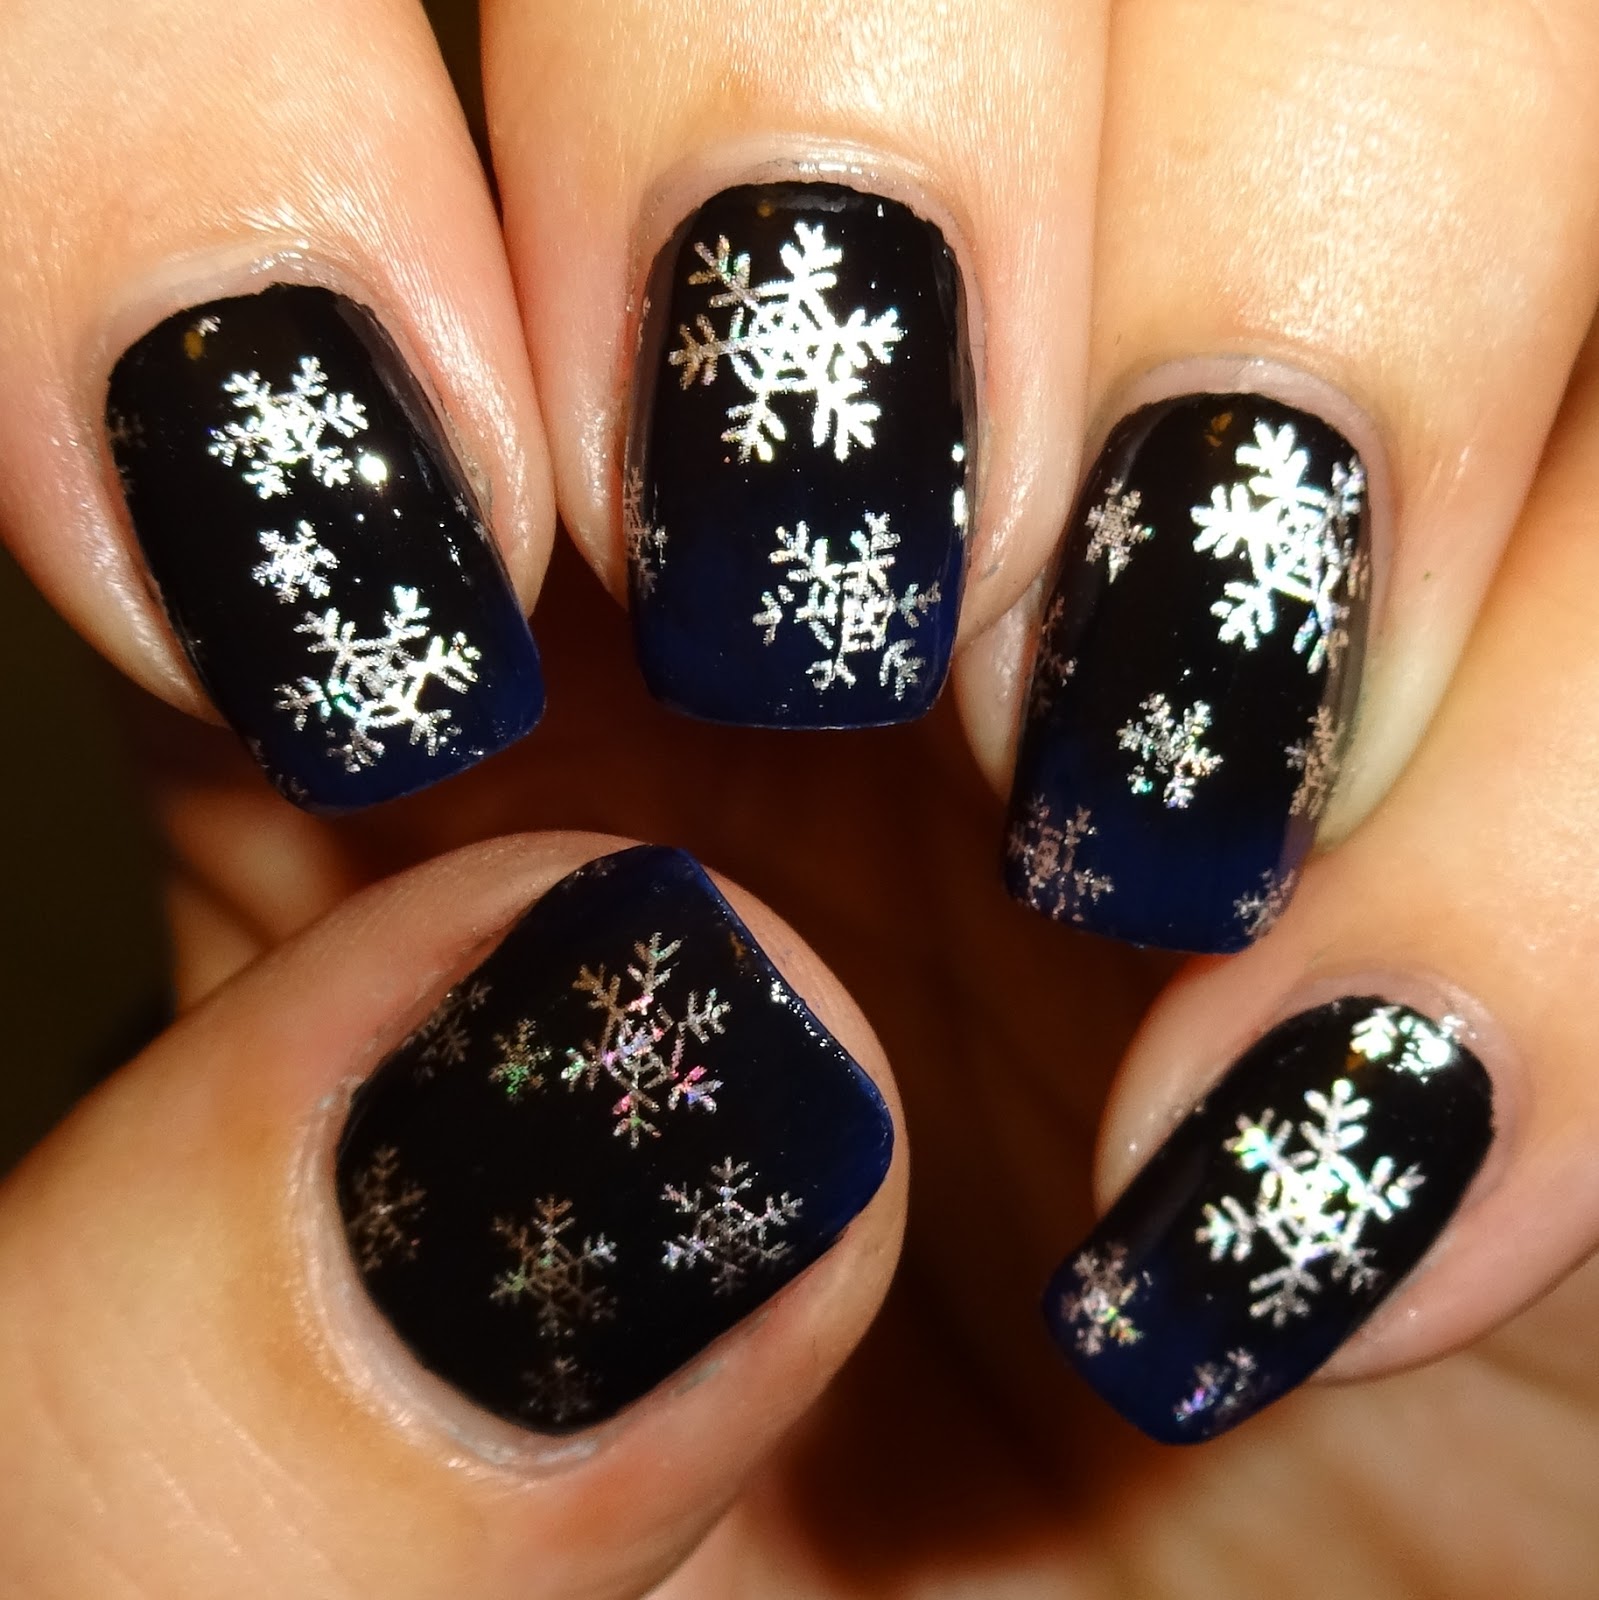 Wendy's Delights: Frosted Snowflake Nail Foil from Sparkly Nails